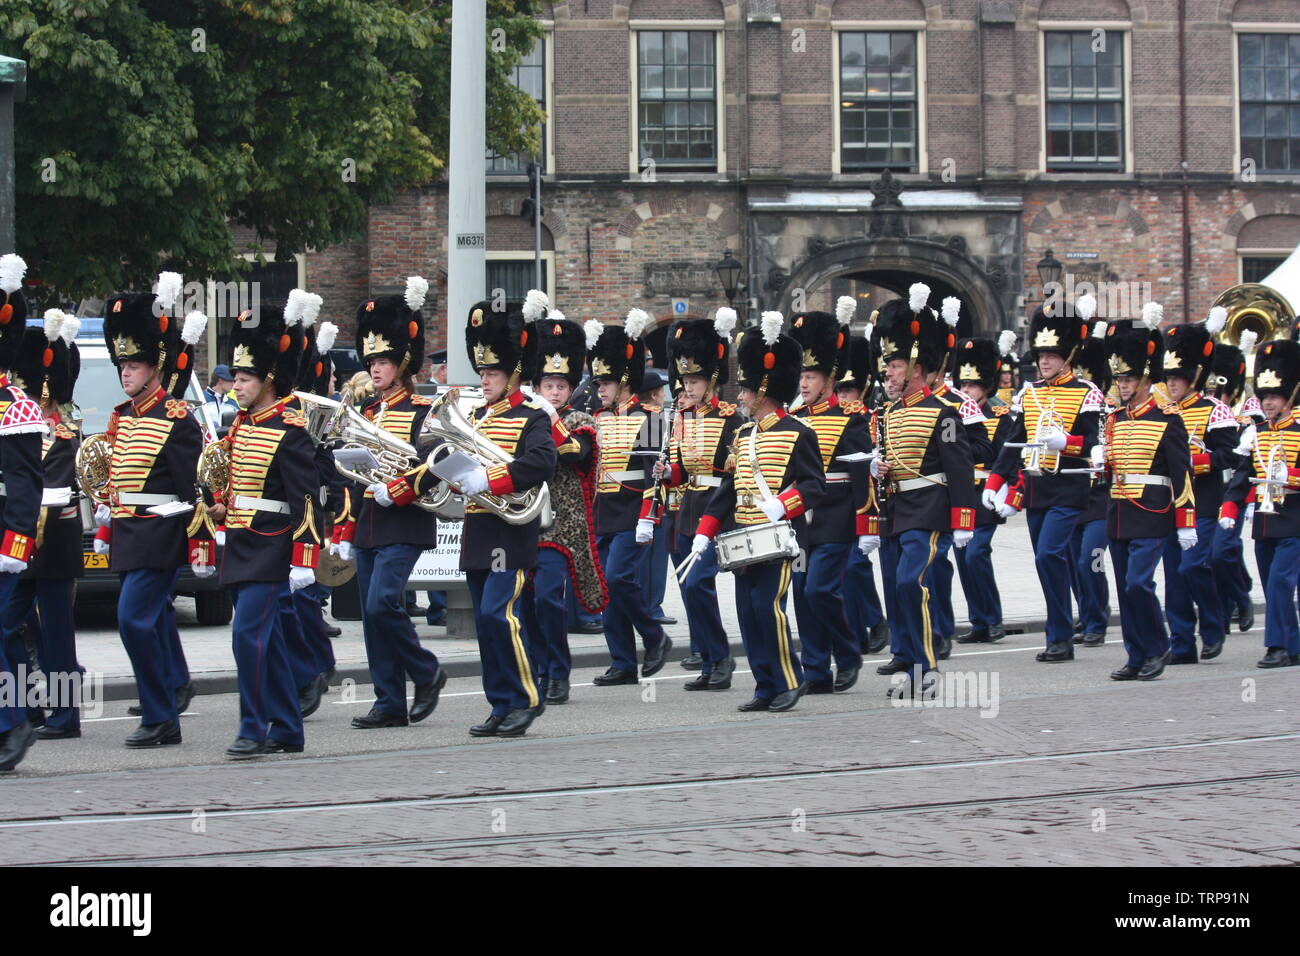 The Central Royal Military Band of the Netherlands Army left The Hall of Knights for Noordeinde Palace after the Prinsjesdag ceremonial in Binnenhof. Stock Photo